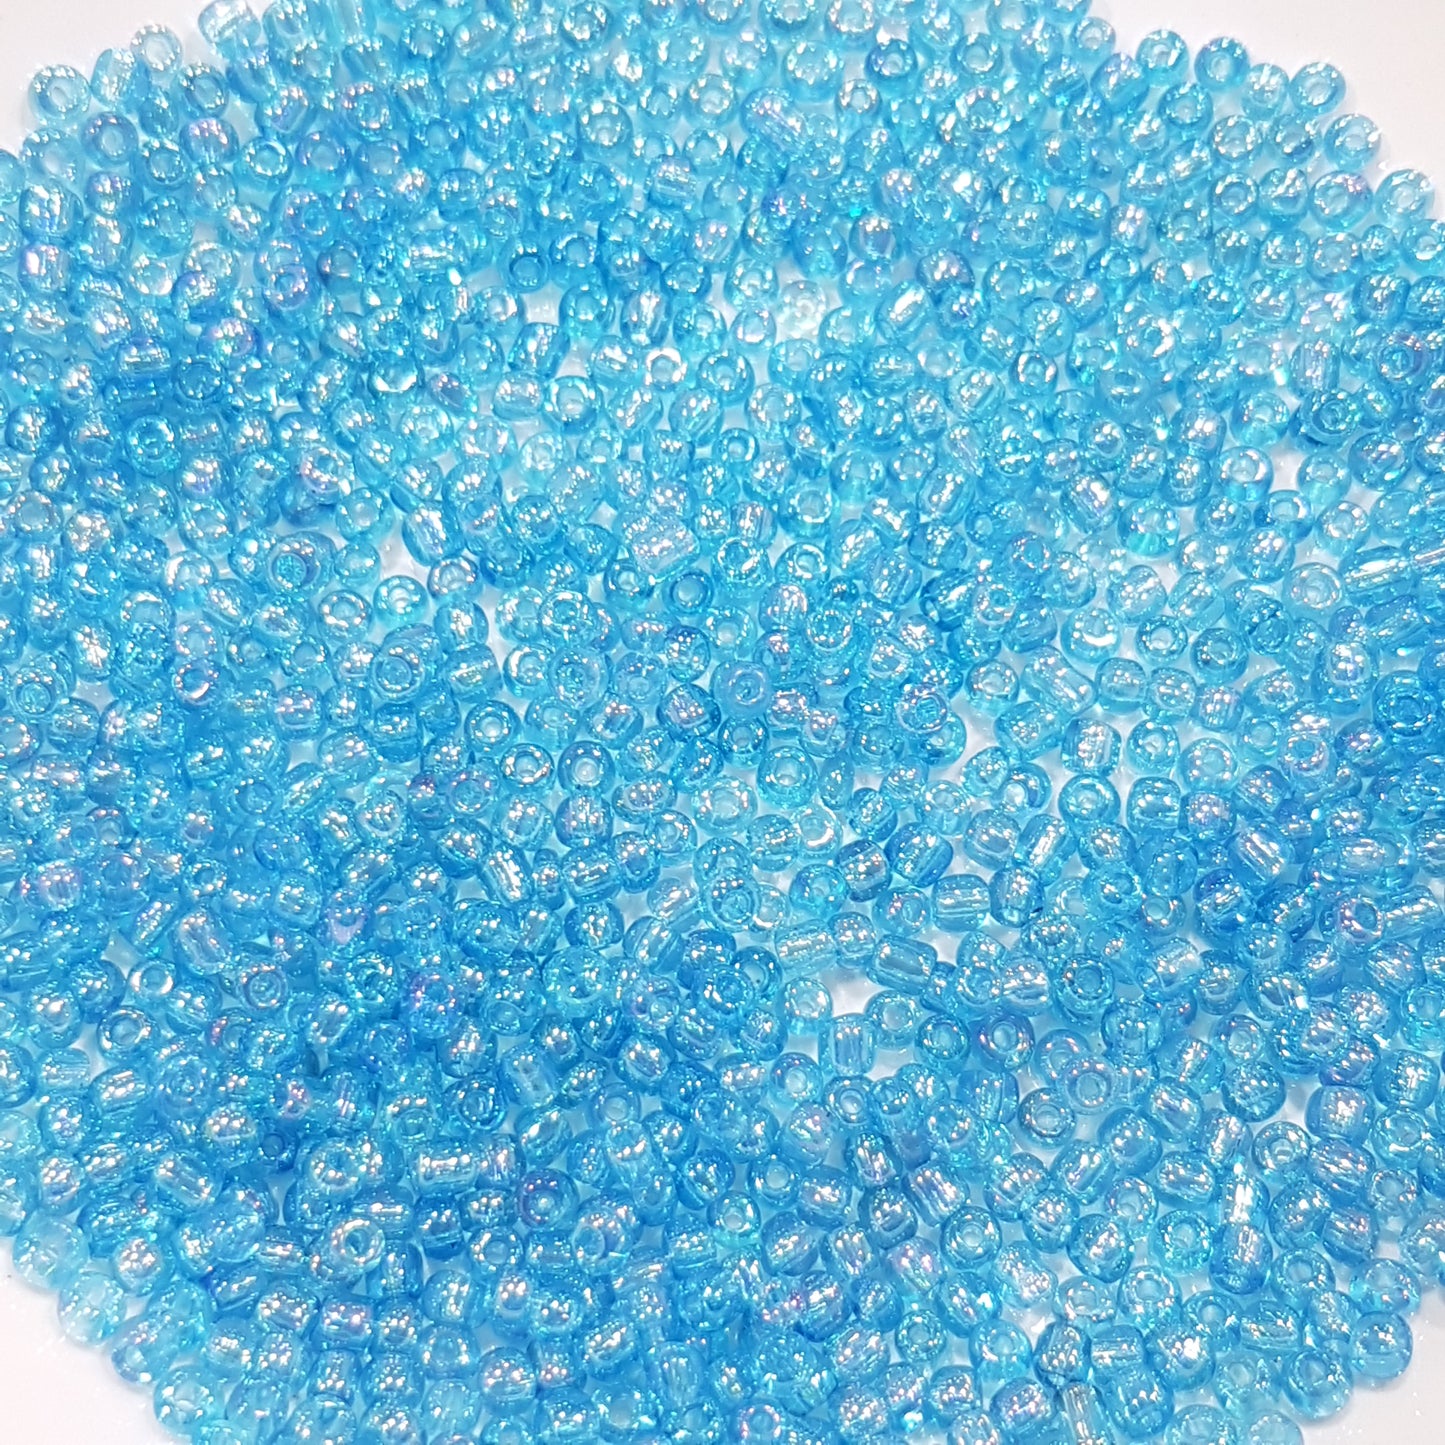 15g 2mm Blue AB Seed Beads